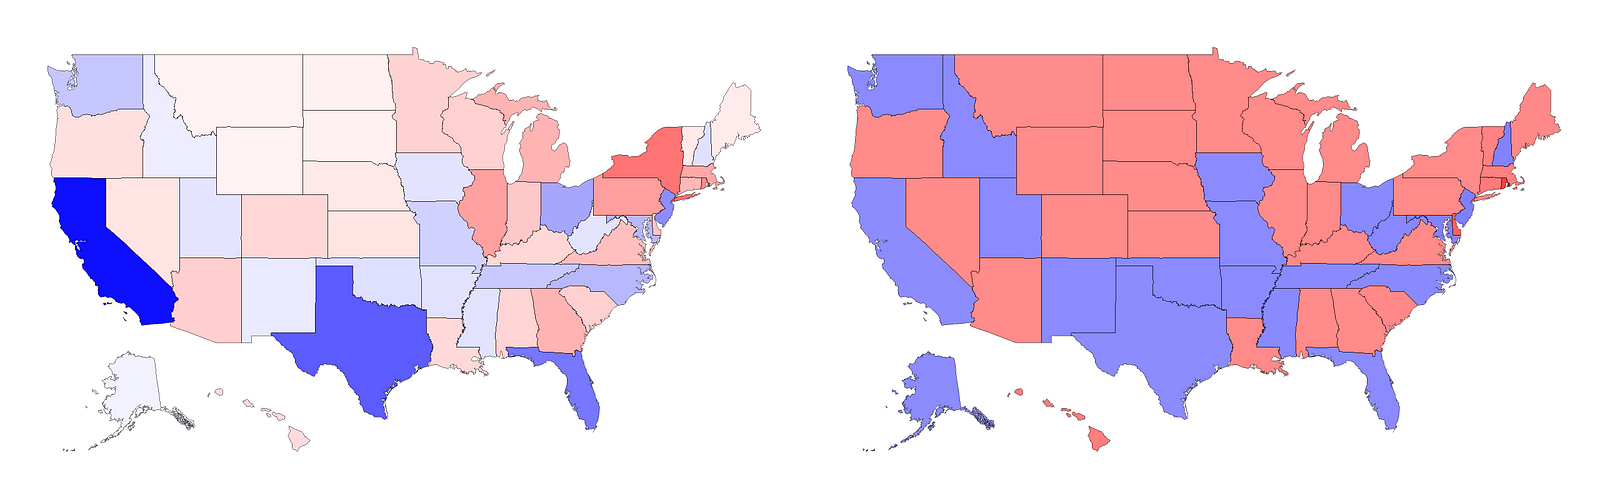 Two maps of the United States. The left one has California, Texas, Florida, and other large states colored darkly.